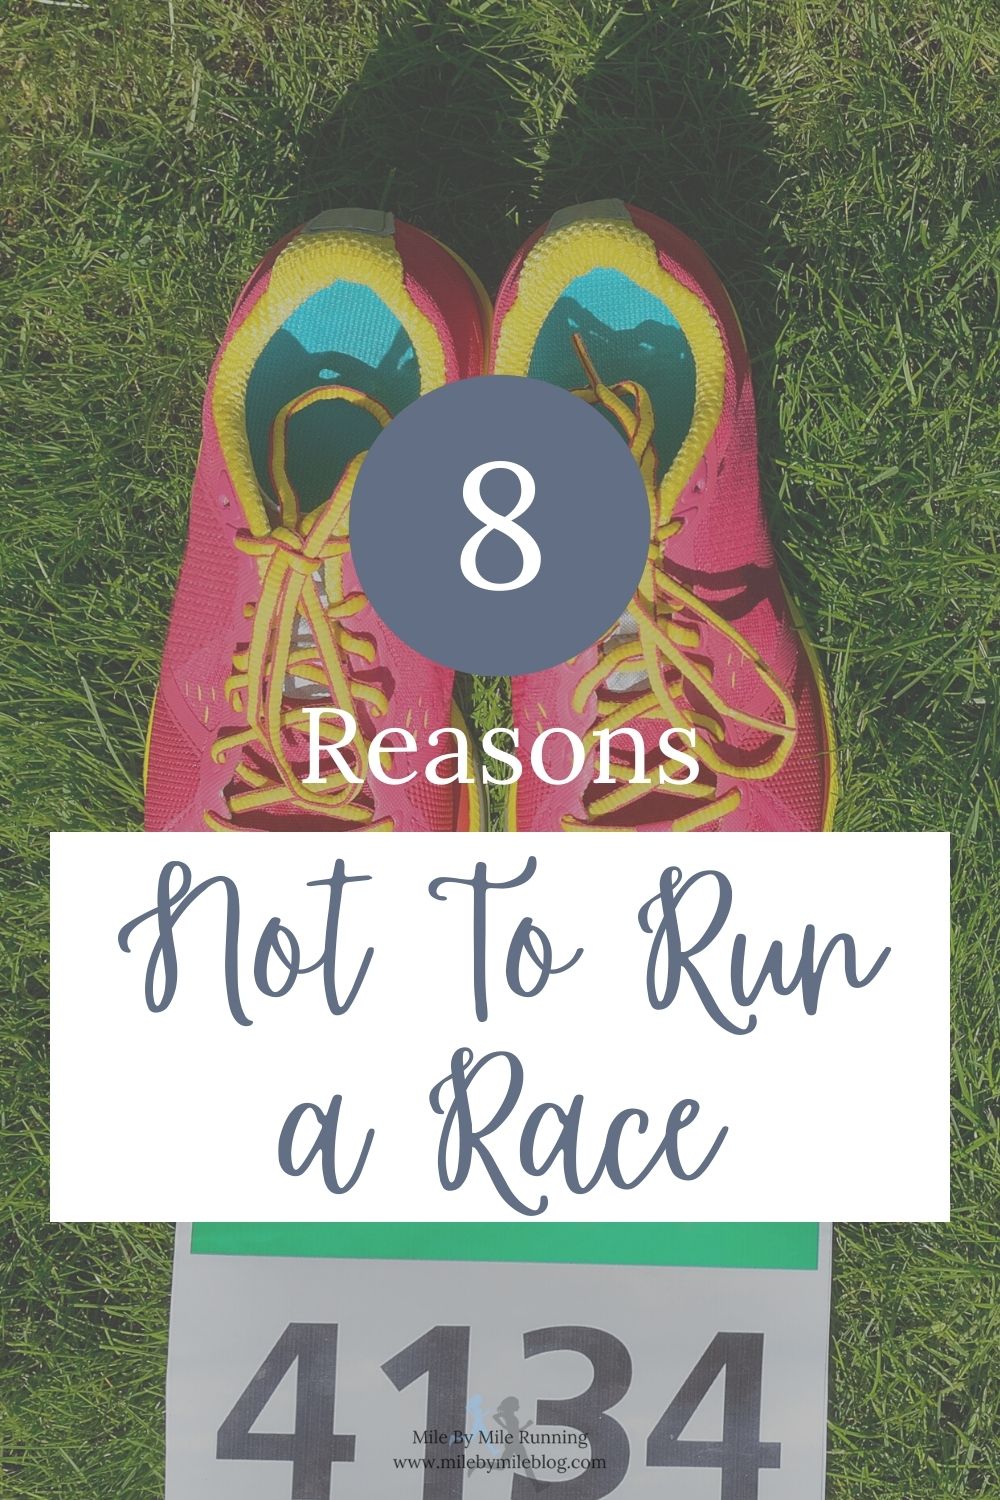 Sometimes in the running community there is pressure to run races all the time. Races are fun, and there are many benefits to racing! However, there are also important reasons not to run a race. Keep these in mind as you are planning out your racing schedule this year, or deciding if you should sign up for that last minute 5k next weekend.